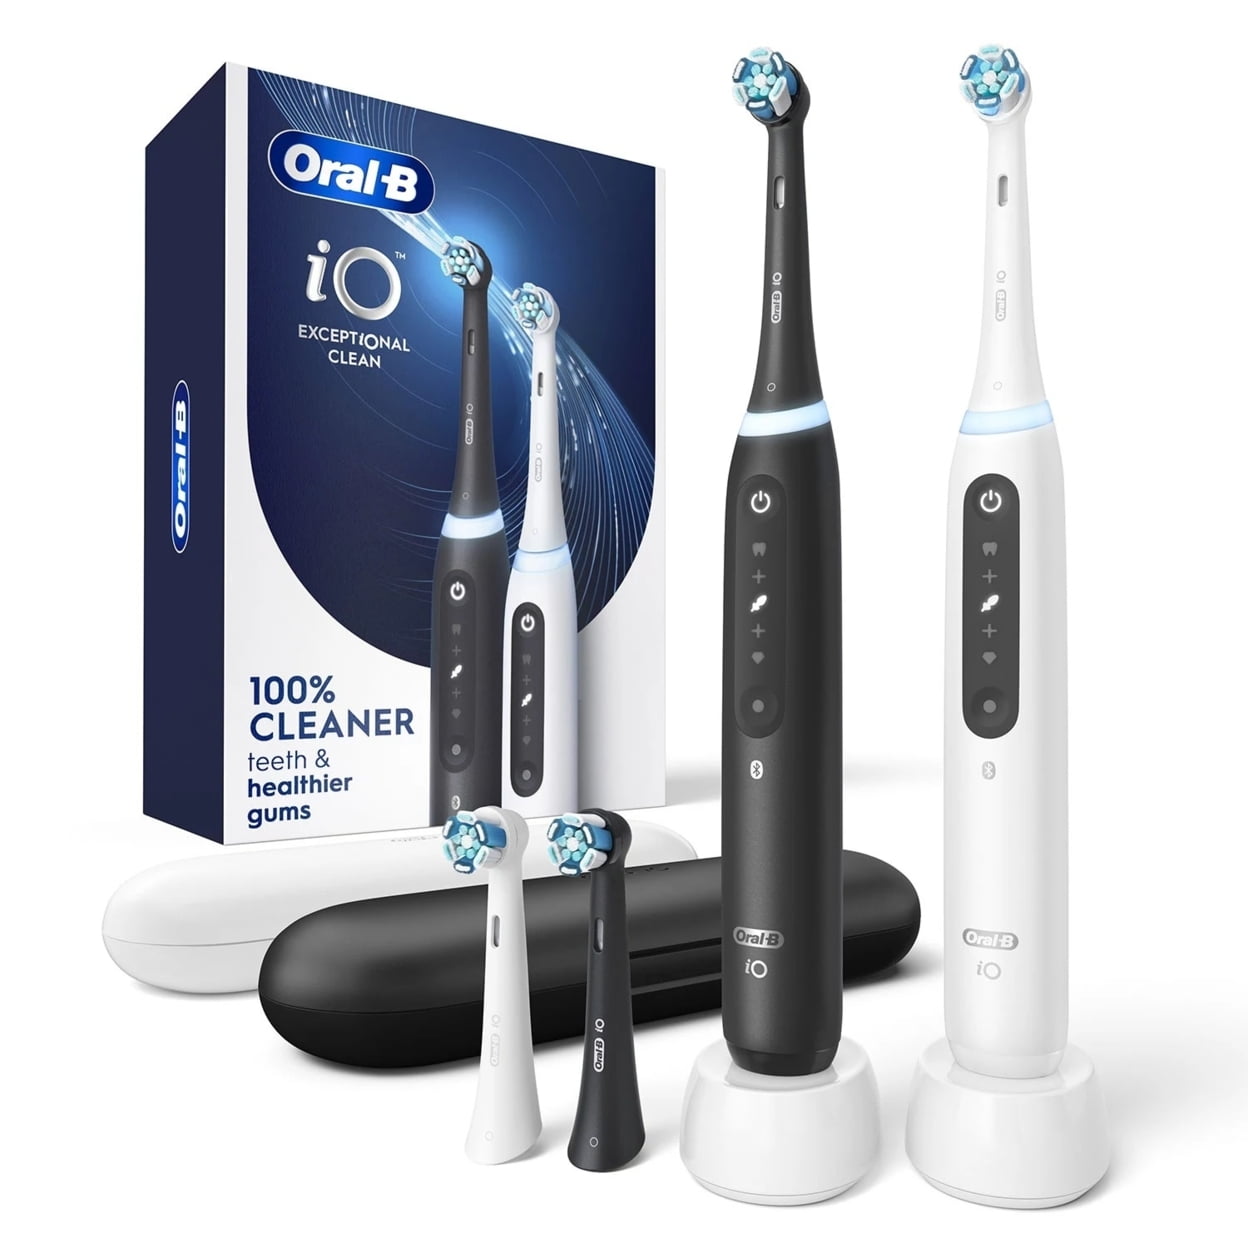 Oral-B iO Dual Pack Toothbrush 5 Rechargeable Series